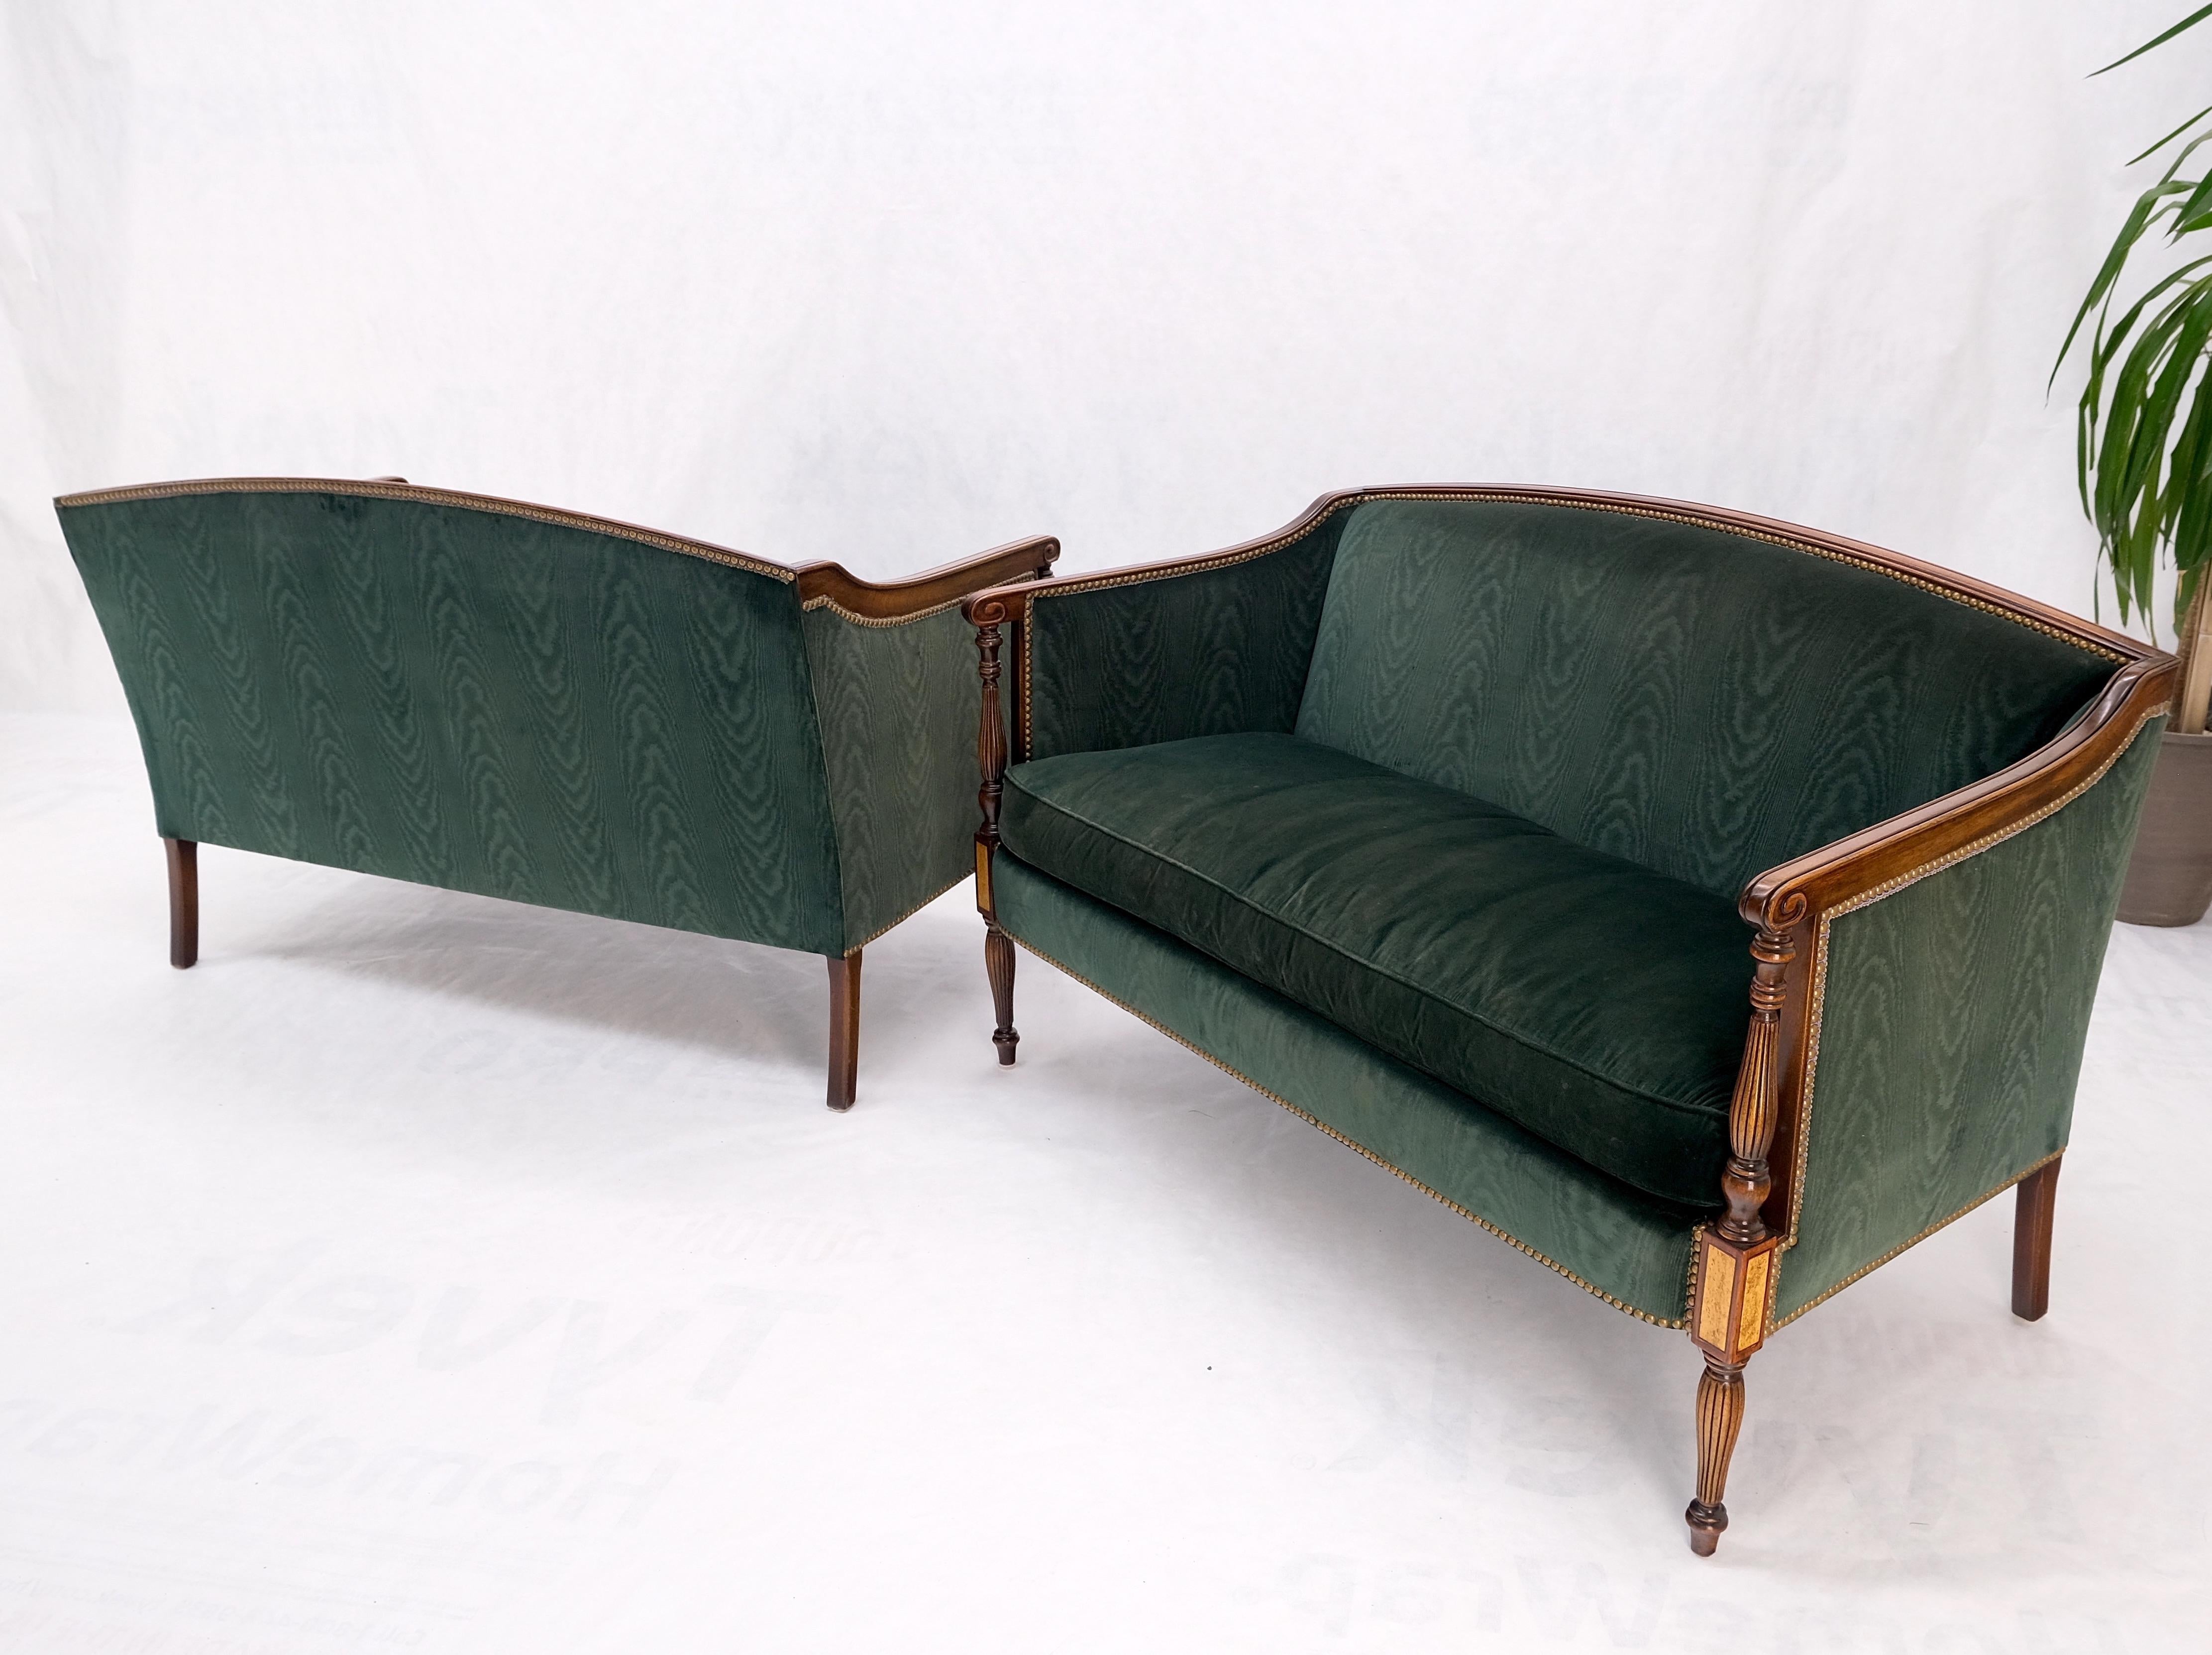 Pair of Walnut & Burl Fine Regency Decorative Love Seats Sofas Settees.
The frames are in mint condition new upholstery recommended.